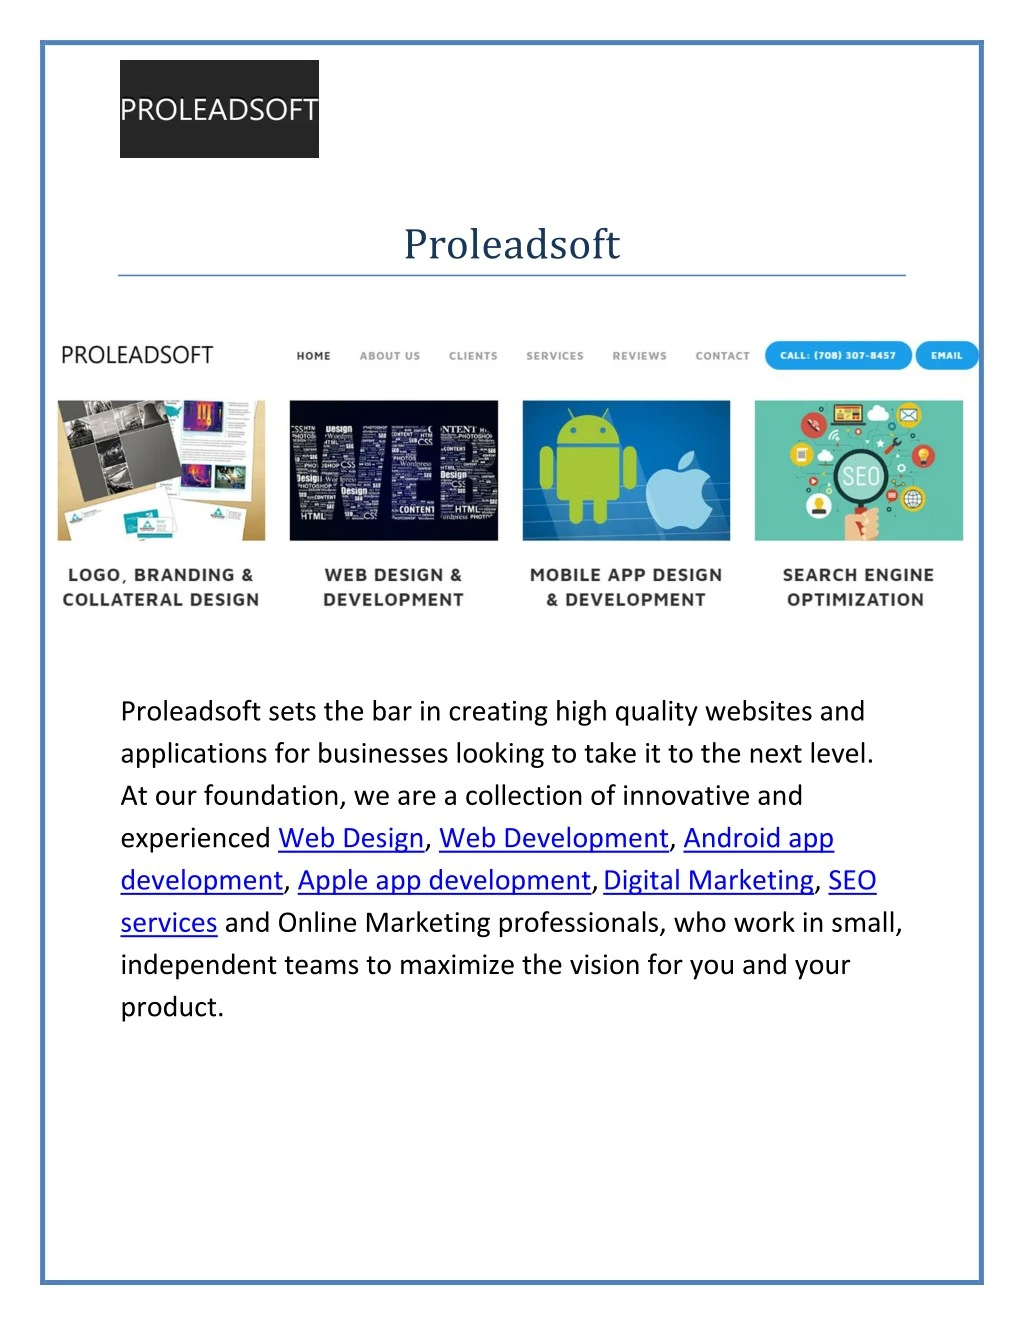 proleadsoft